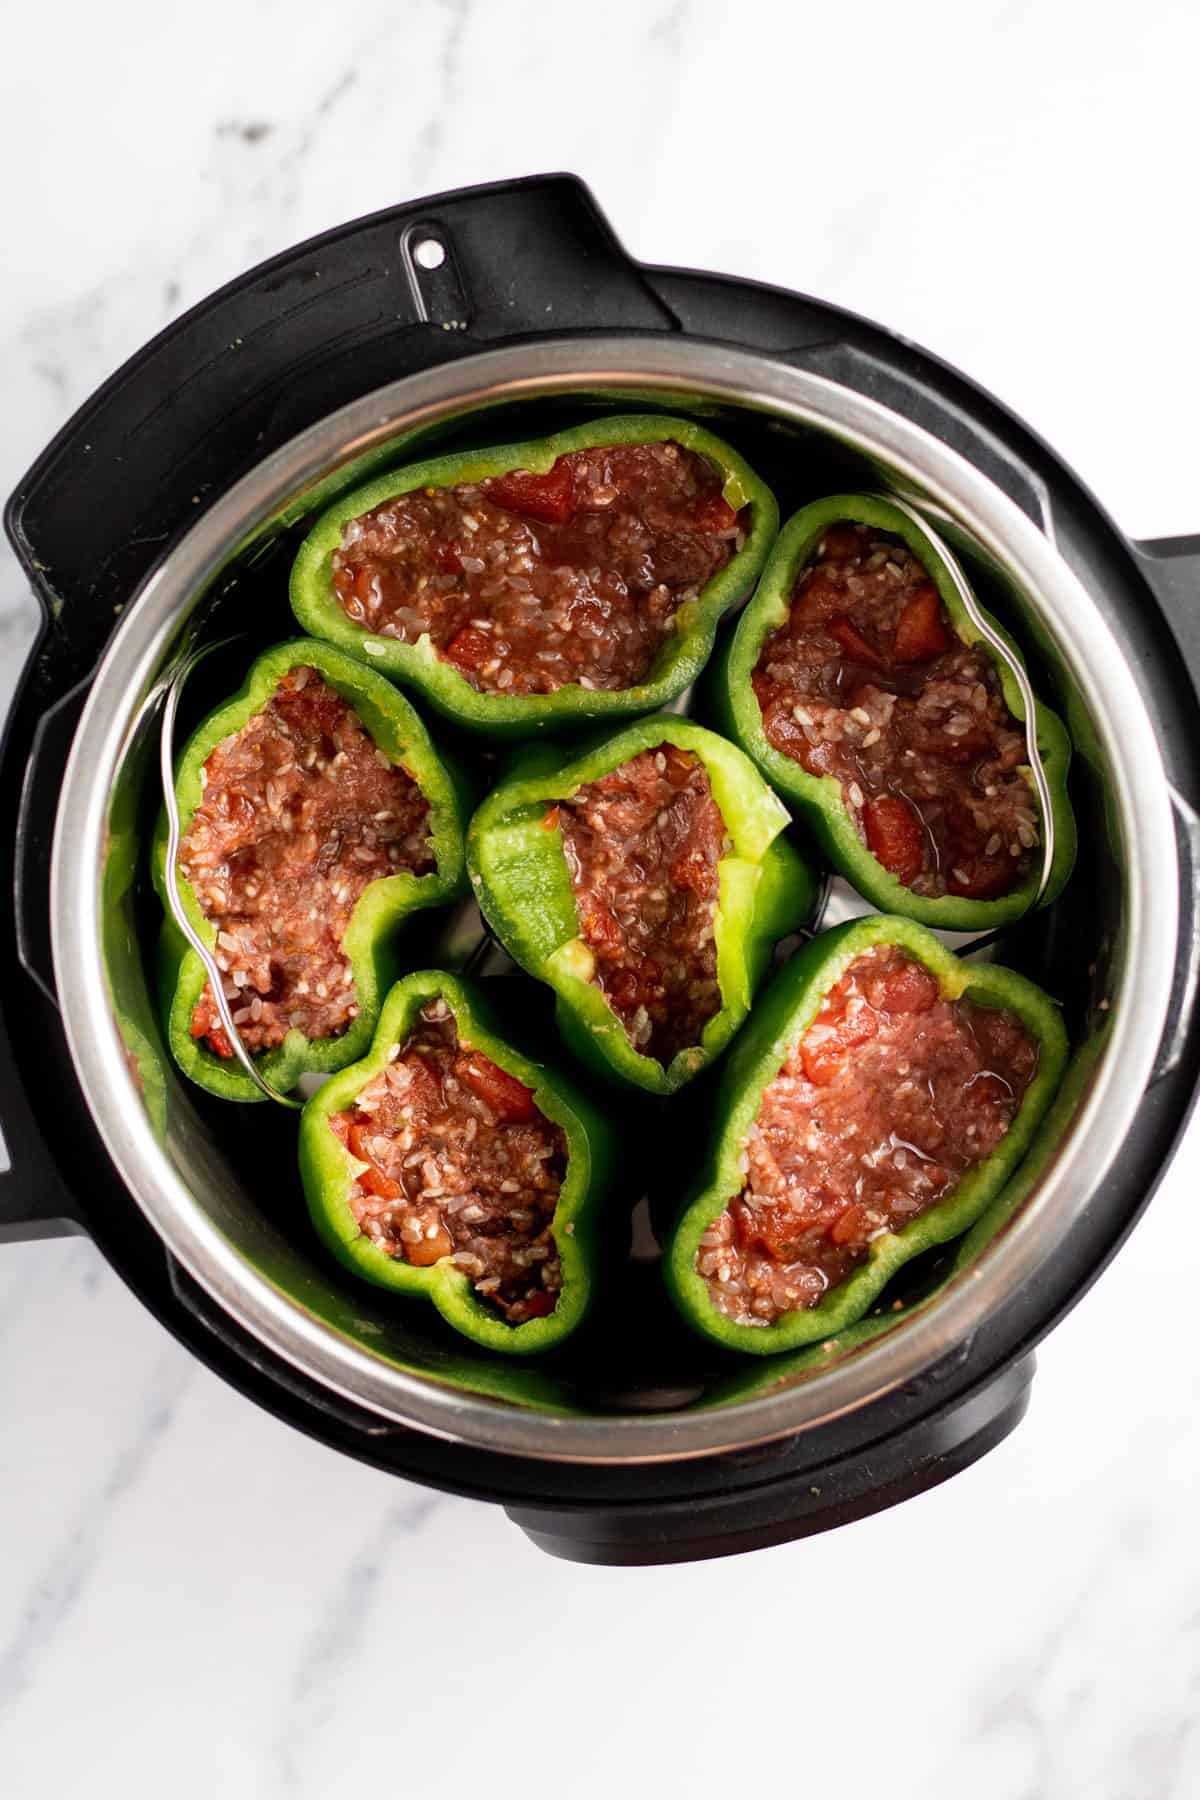 peppers stuffed with ground beef mixture on a trivet in a pressure cooker